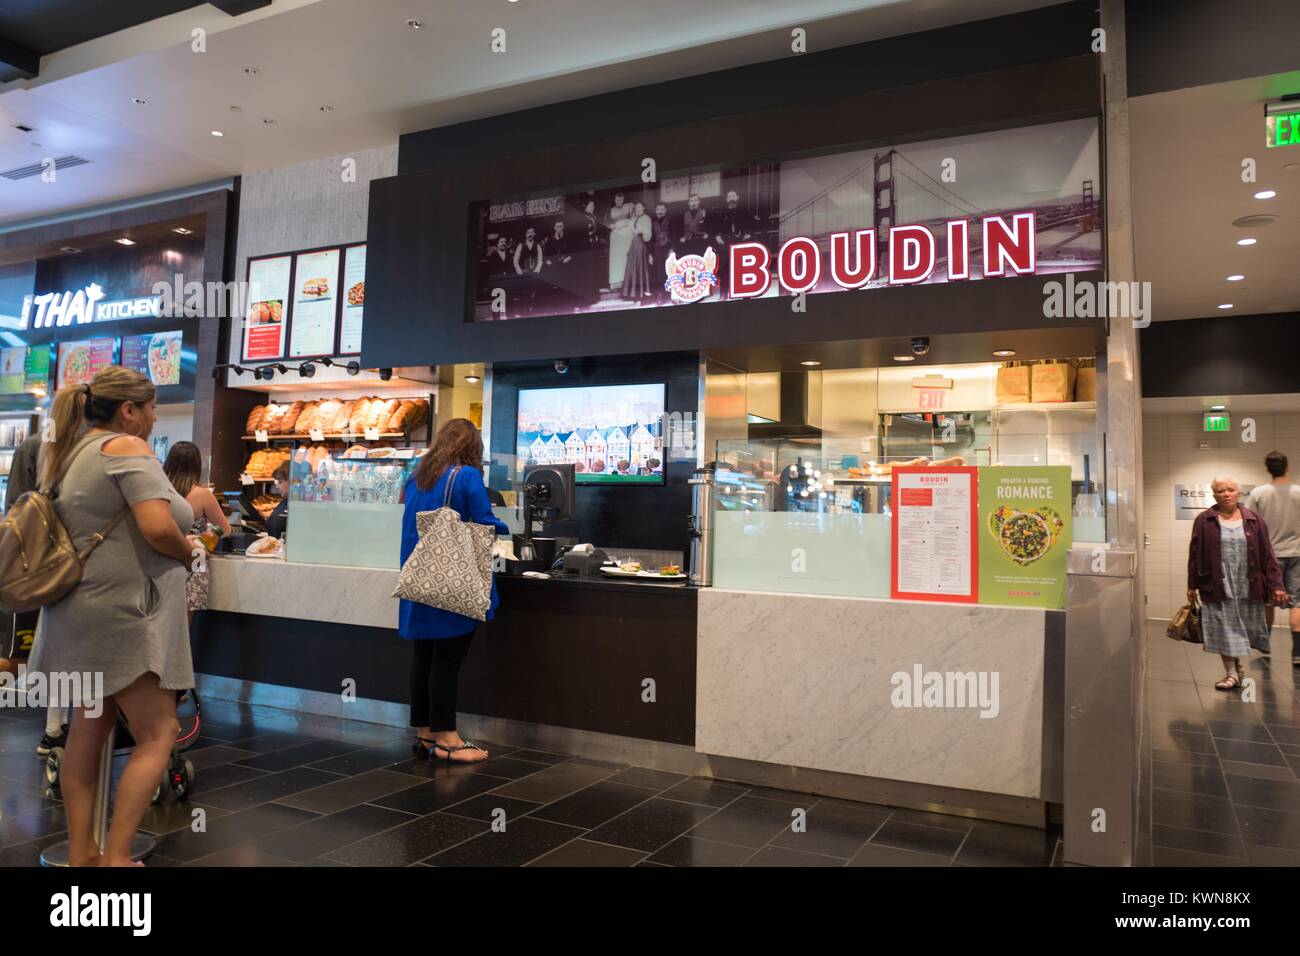 Guests order food at Boudin, a San Francisco chain restaurant serving sourdough bread, at the Westfield Valley Fair shopping mall in the Silicon Valley town of San Jose, California, July 25, 2017. Stock Photo